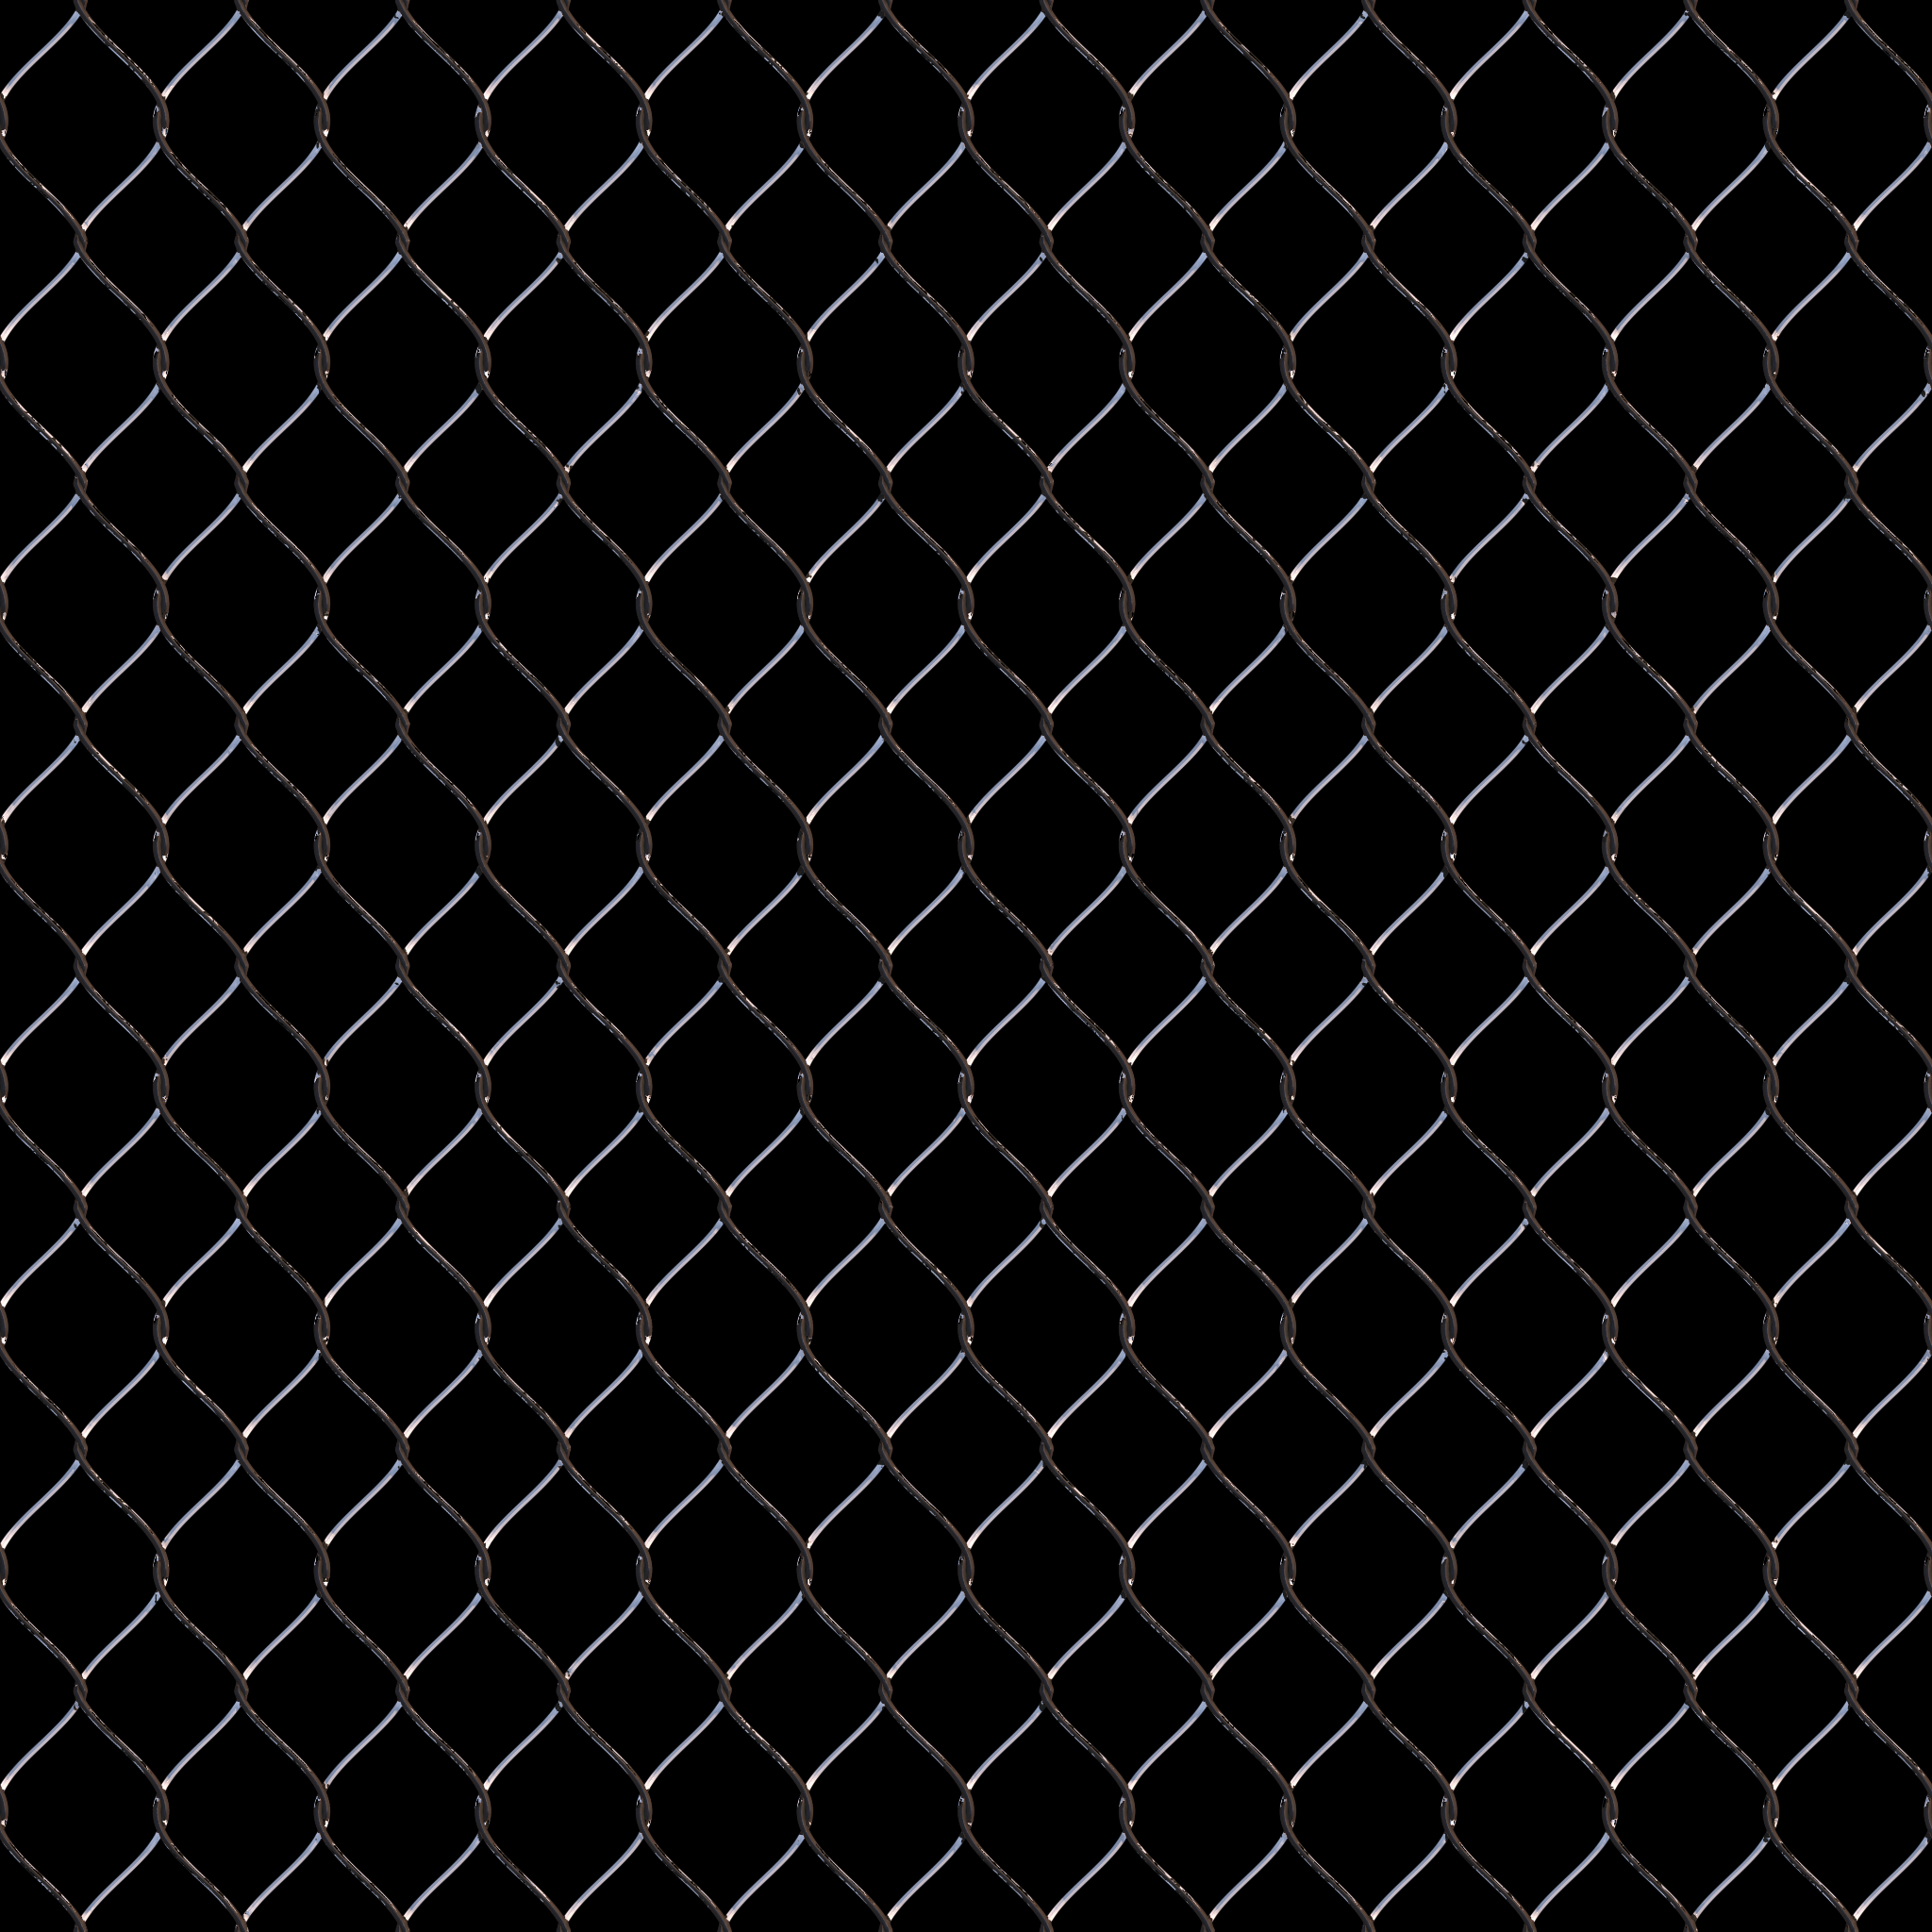 Fine metal mesh PNG - seamless texture by Strapaca on DeviantArt